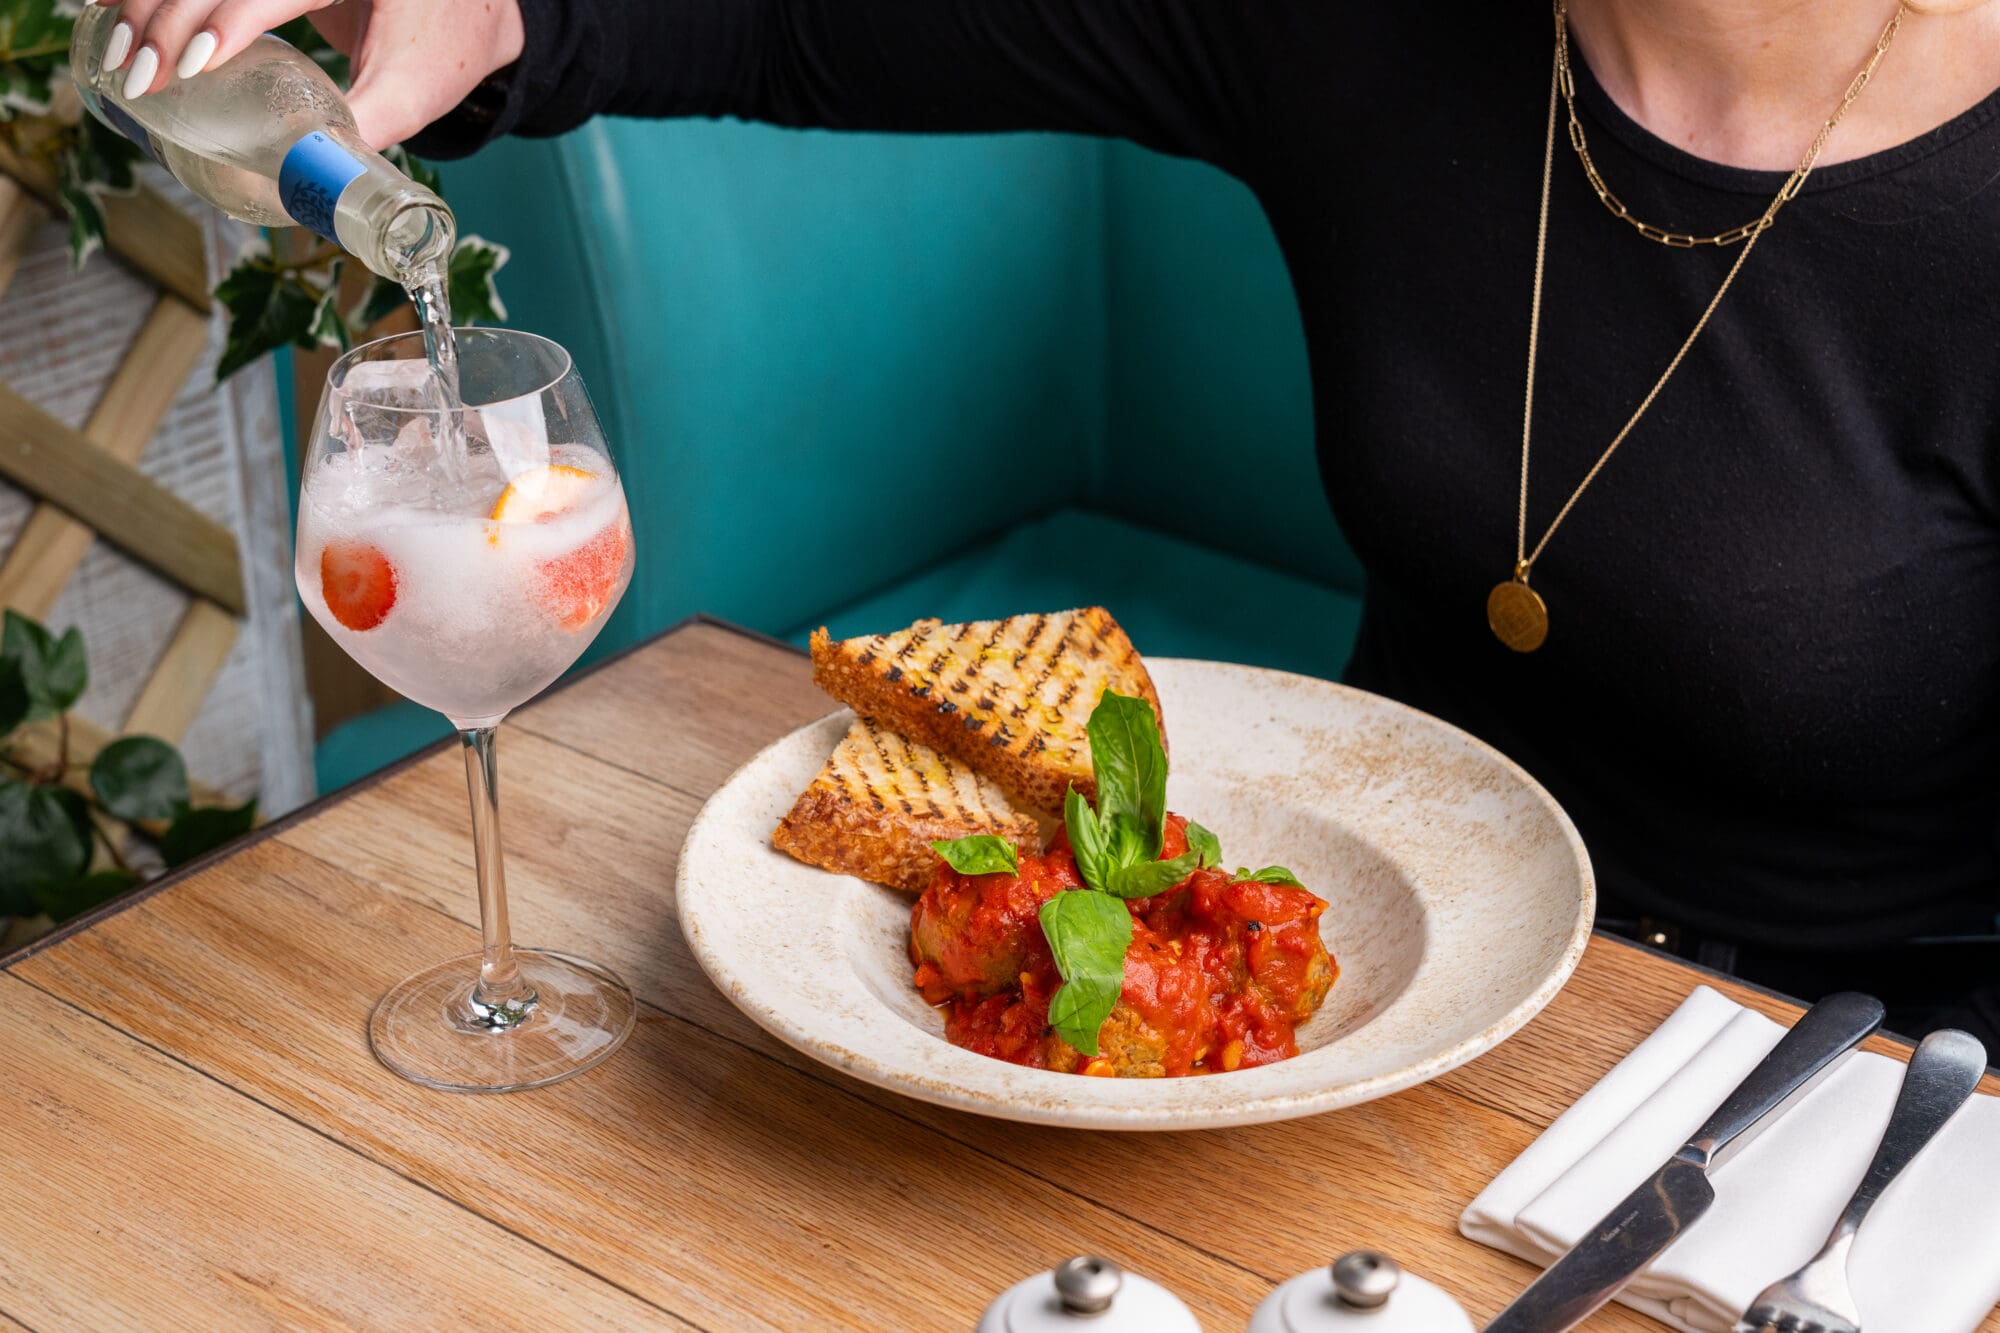 Woman is pouring tonic into a glass with a bowl of meatballs in front of her